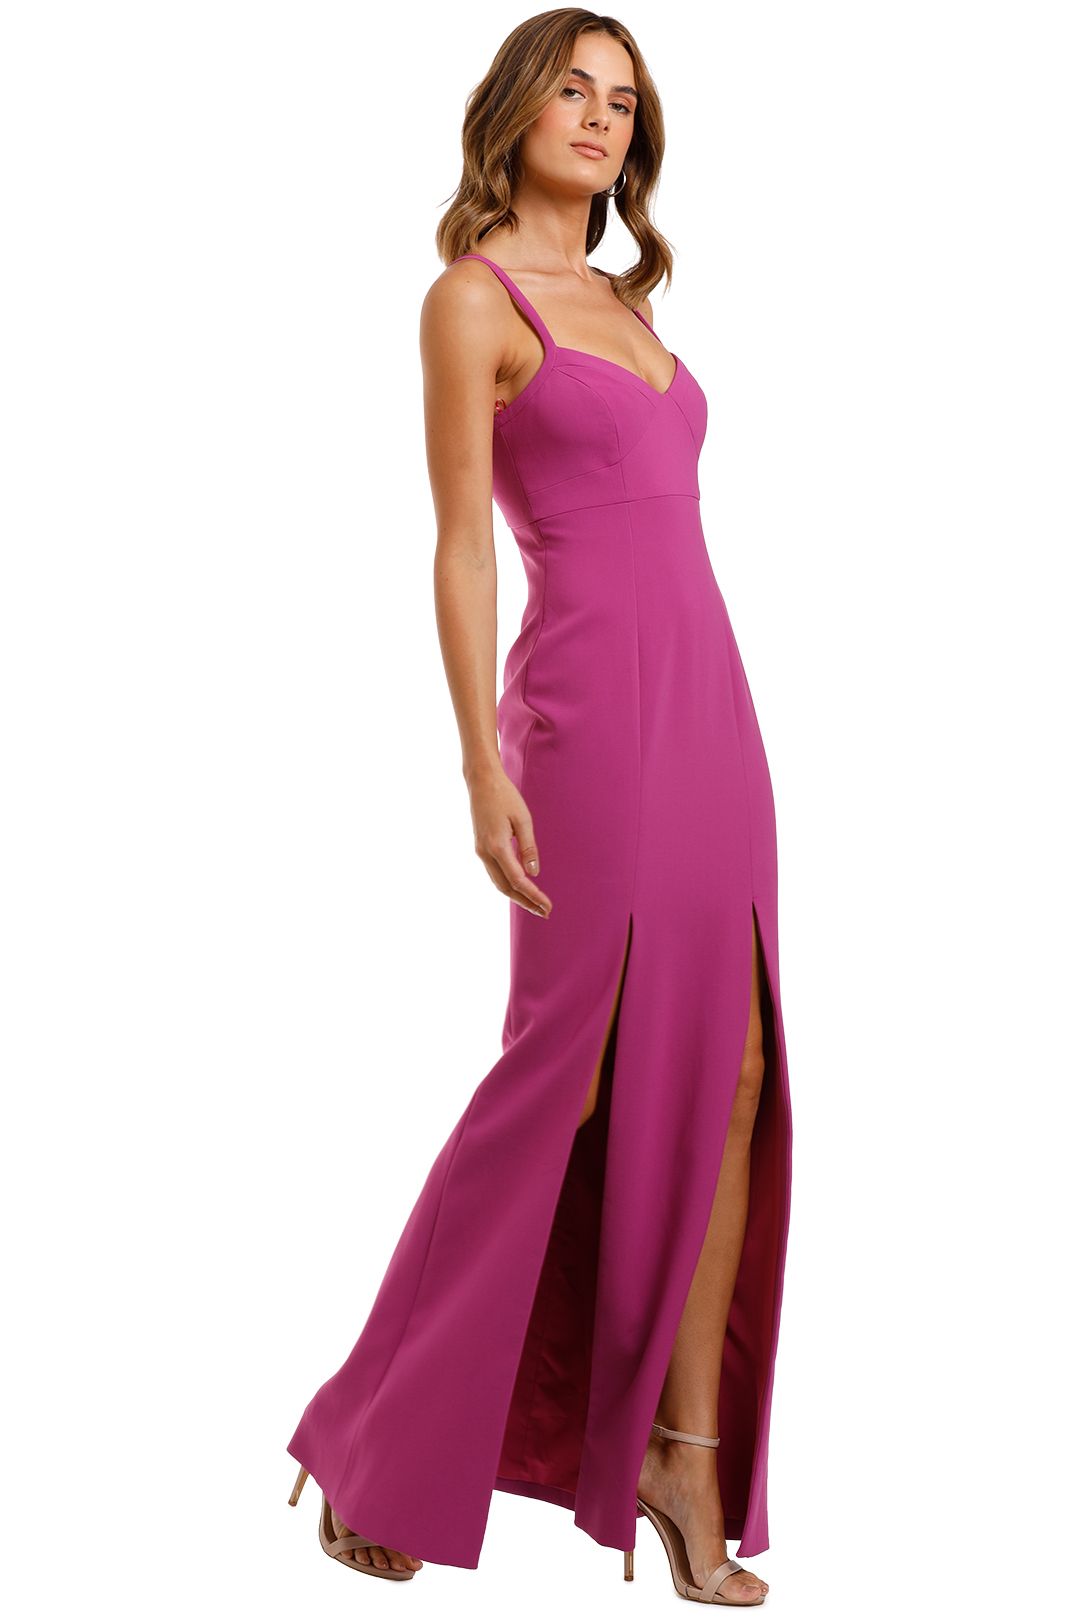 Likely NYC Alameda Gown Maxi